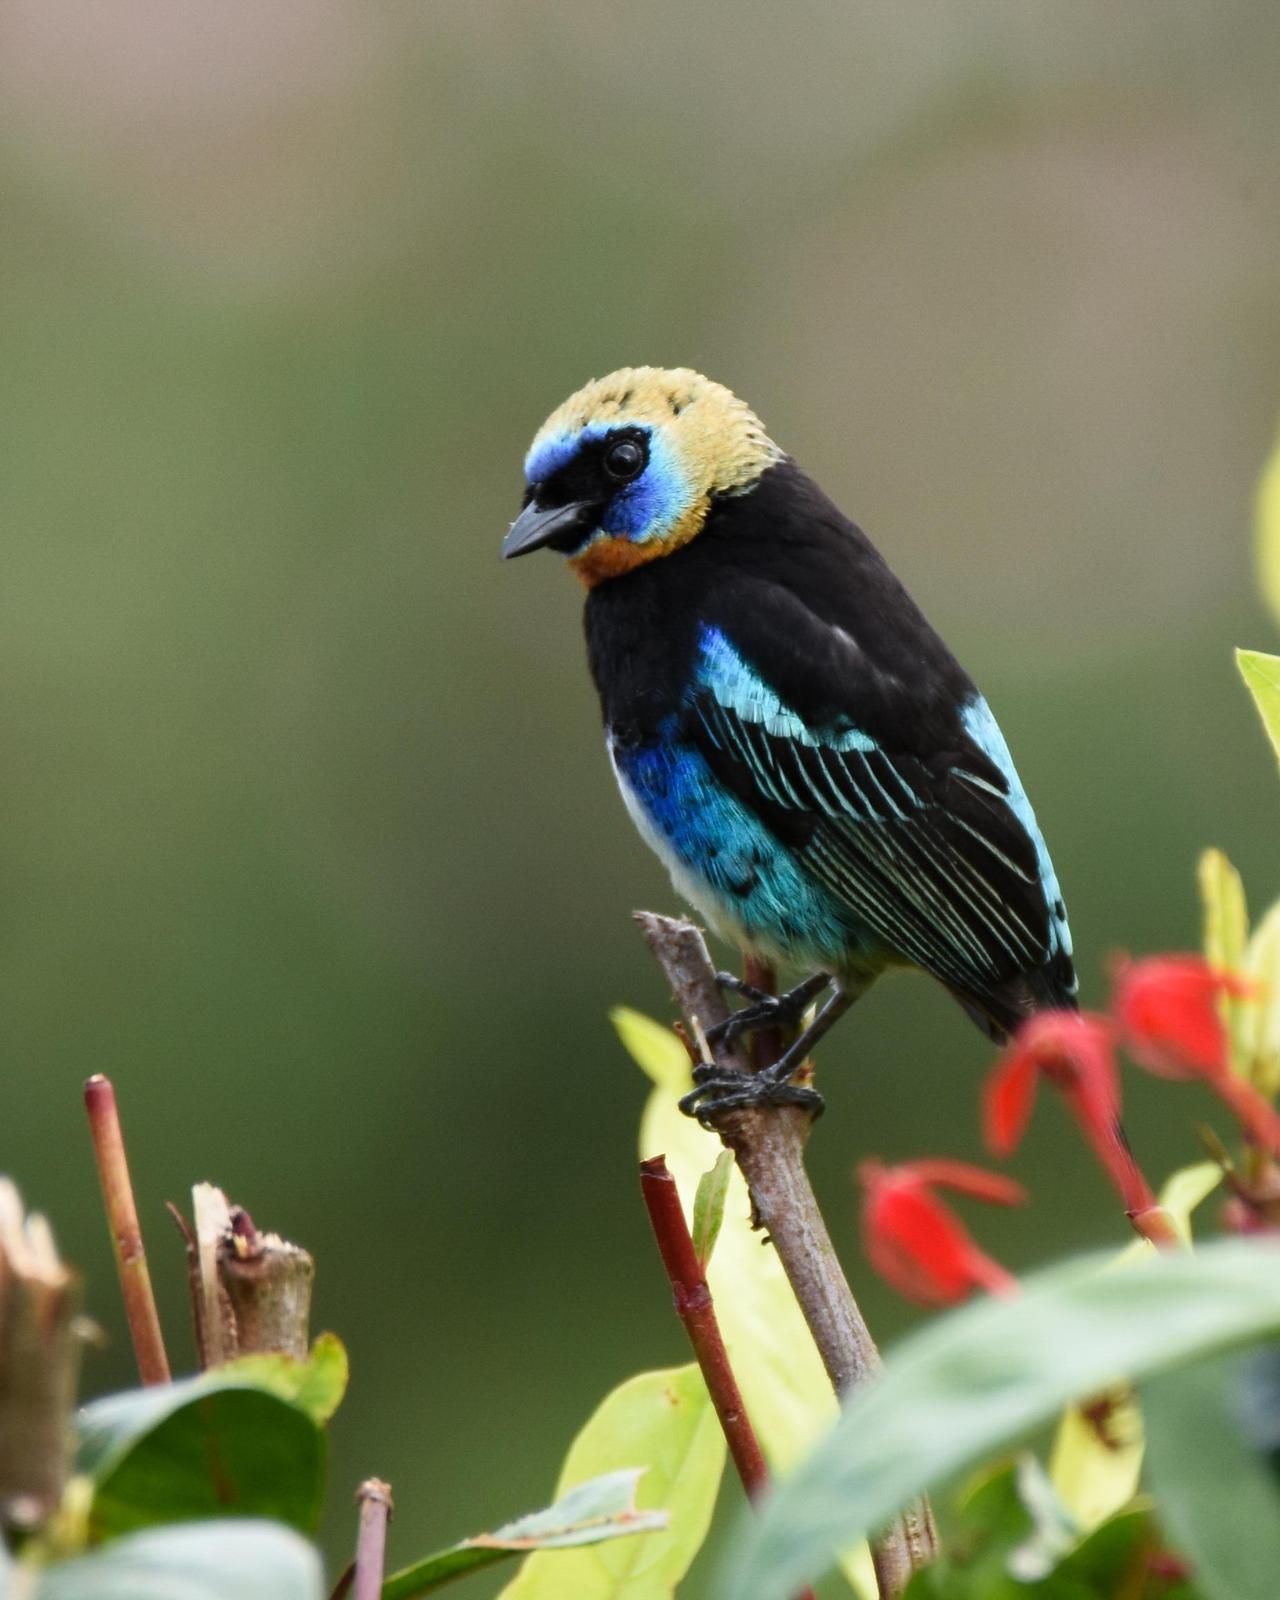 Golden-hooded Tanager Photo by Cherylyn Murphy